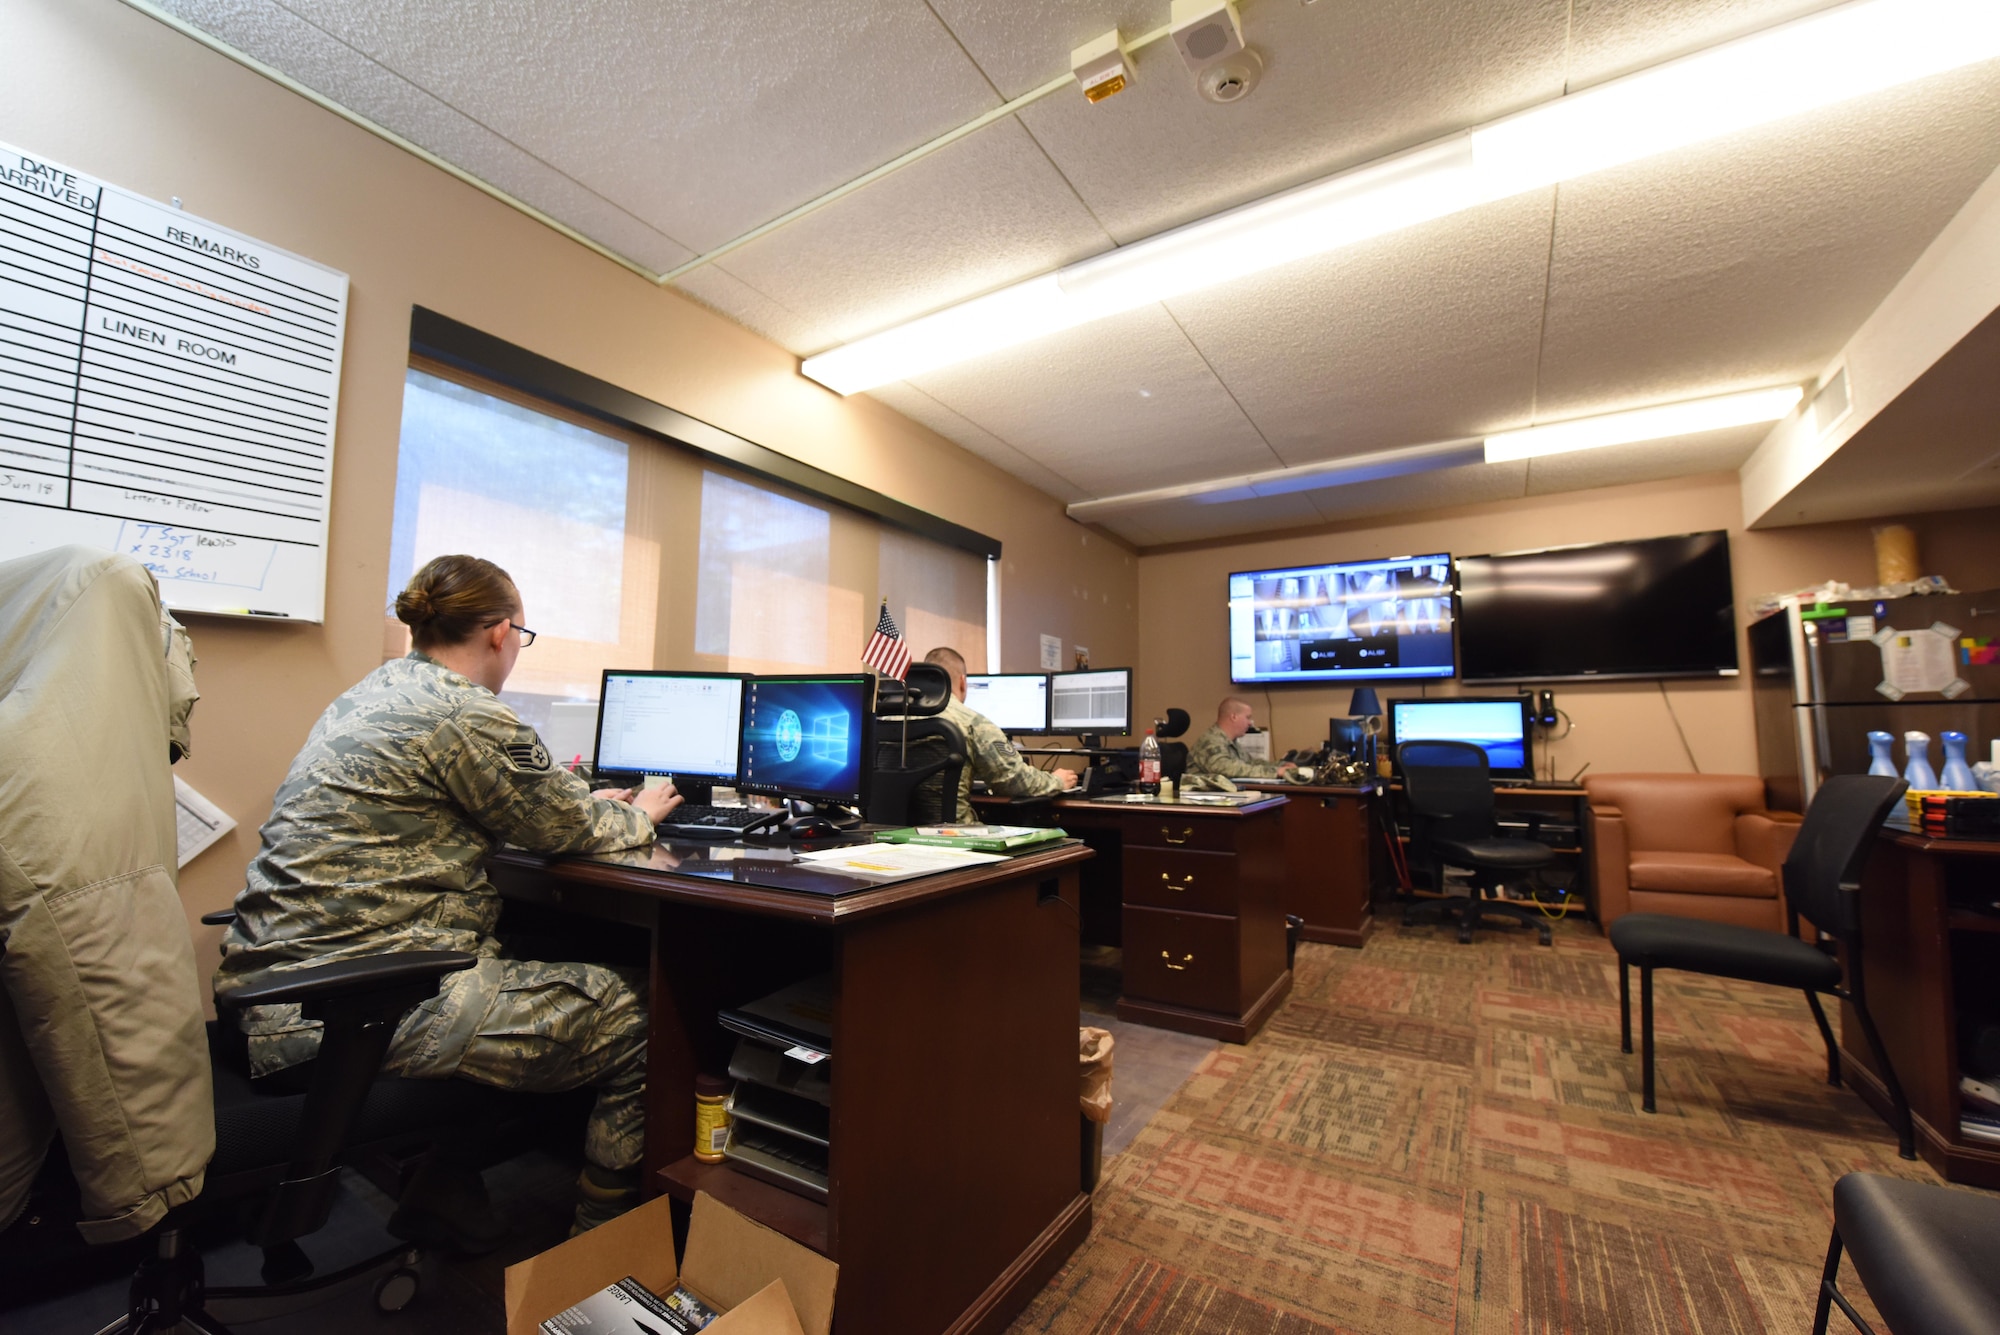 Airman dorm leaders work on their computers at Ellsworth Air Force Base, S.D., July 16, 2018. Airman dorm leaders are preparing for a new dorm to be finished in January 2019, which will provide new housing for more than 120 Airmen. (U.S. Air Force photo by Airman 1st Class Thomas Karol)